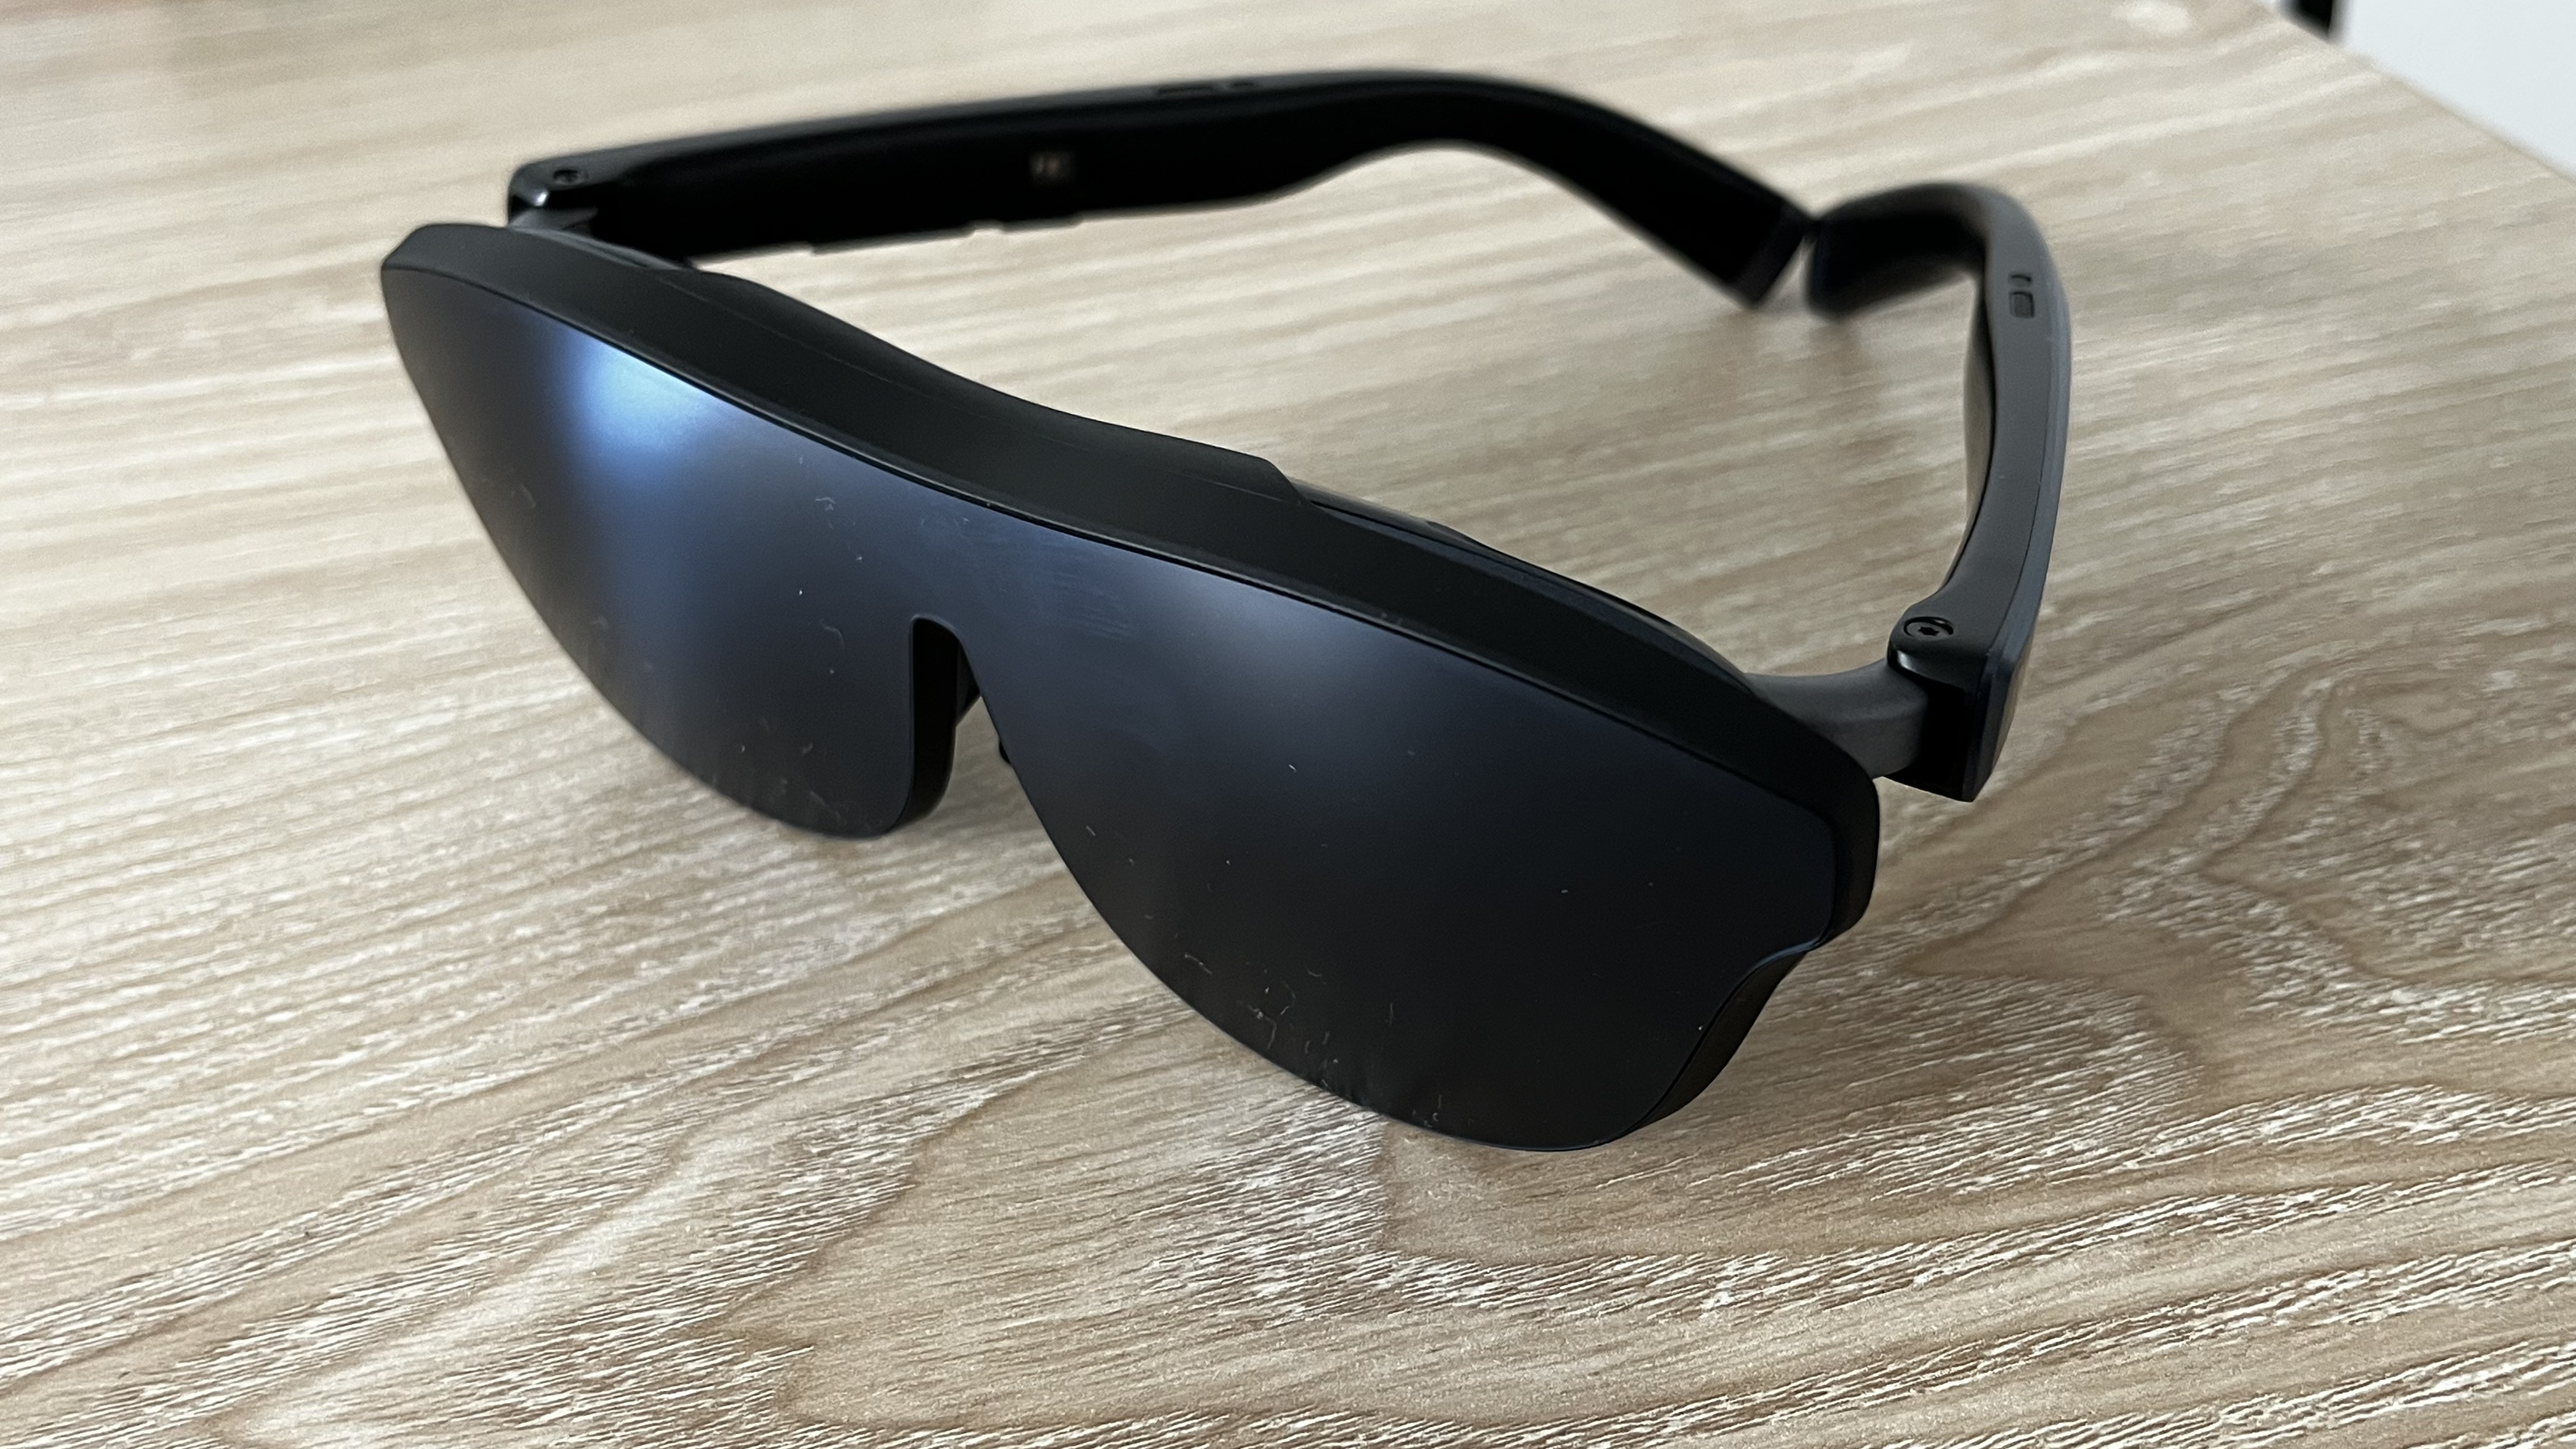 I've used the Rokid Max AR glasses – and now I'm sold on the